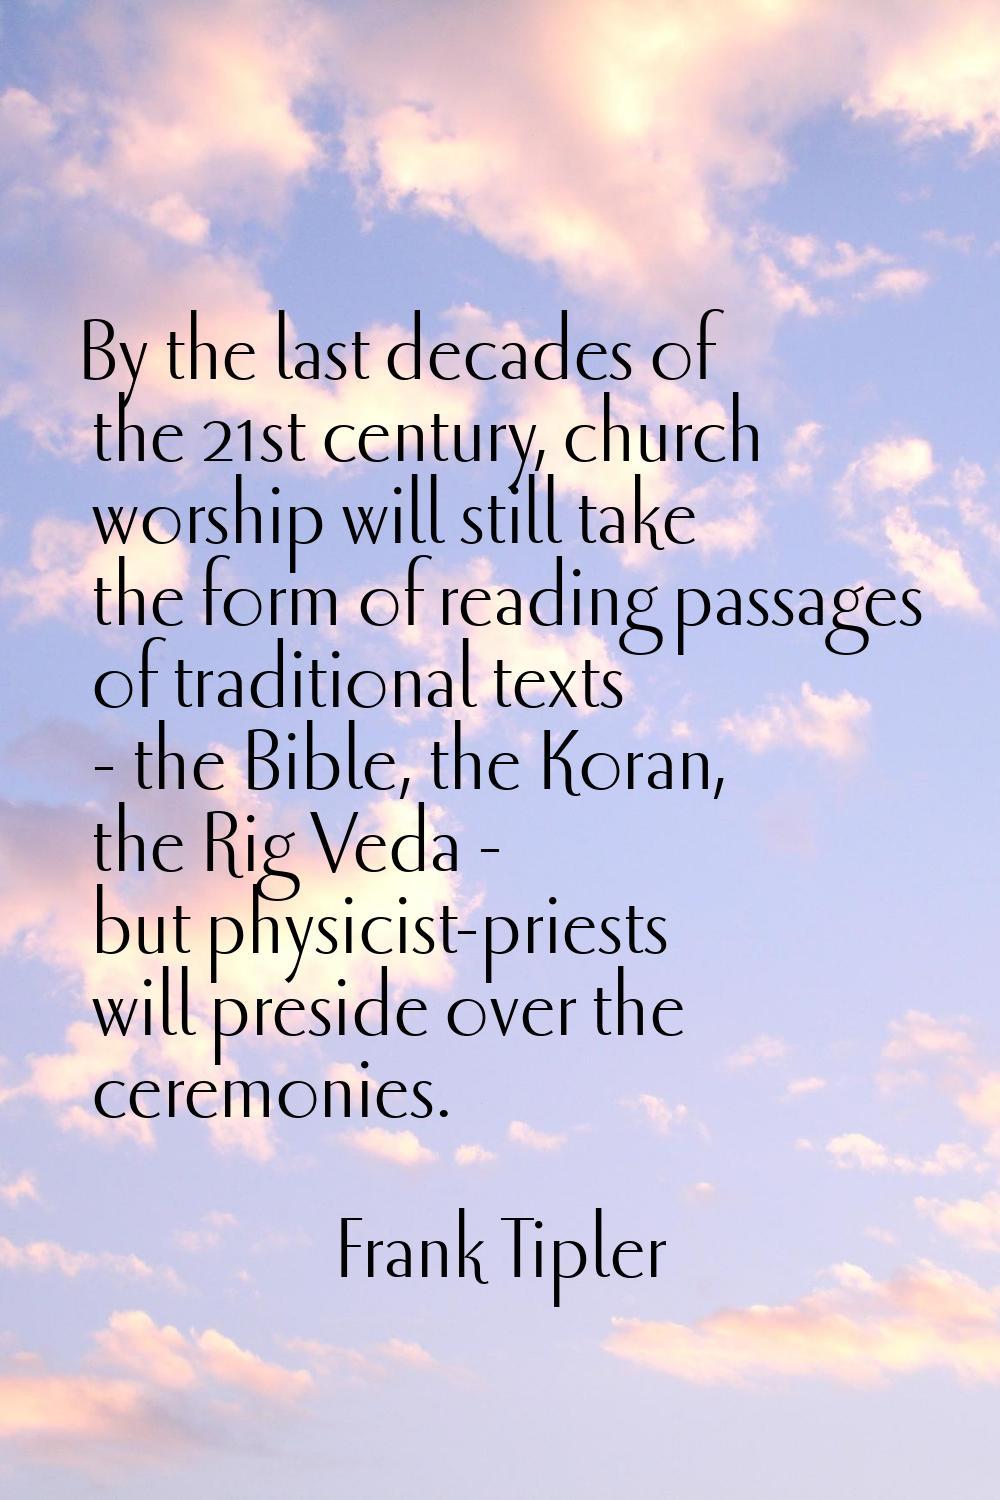 By the last decades of the 21st century, church worship will still take the form of reading passage